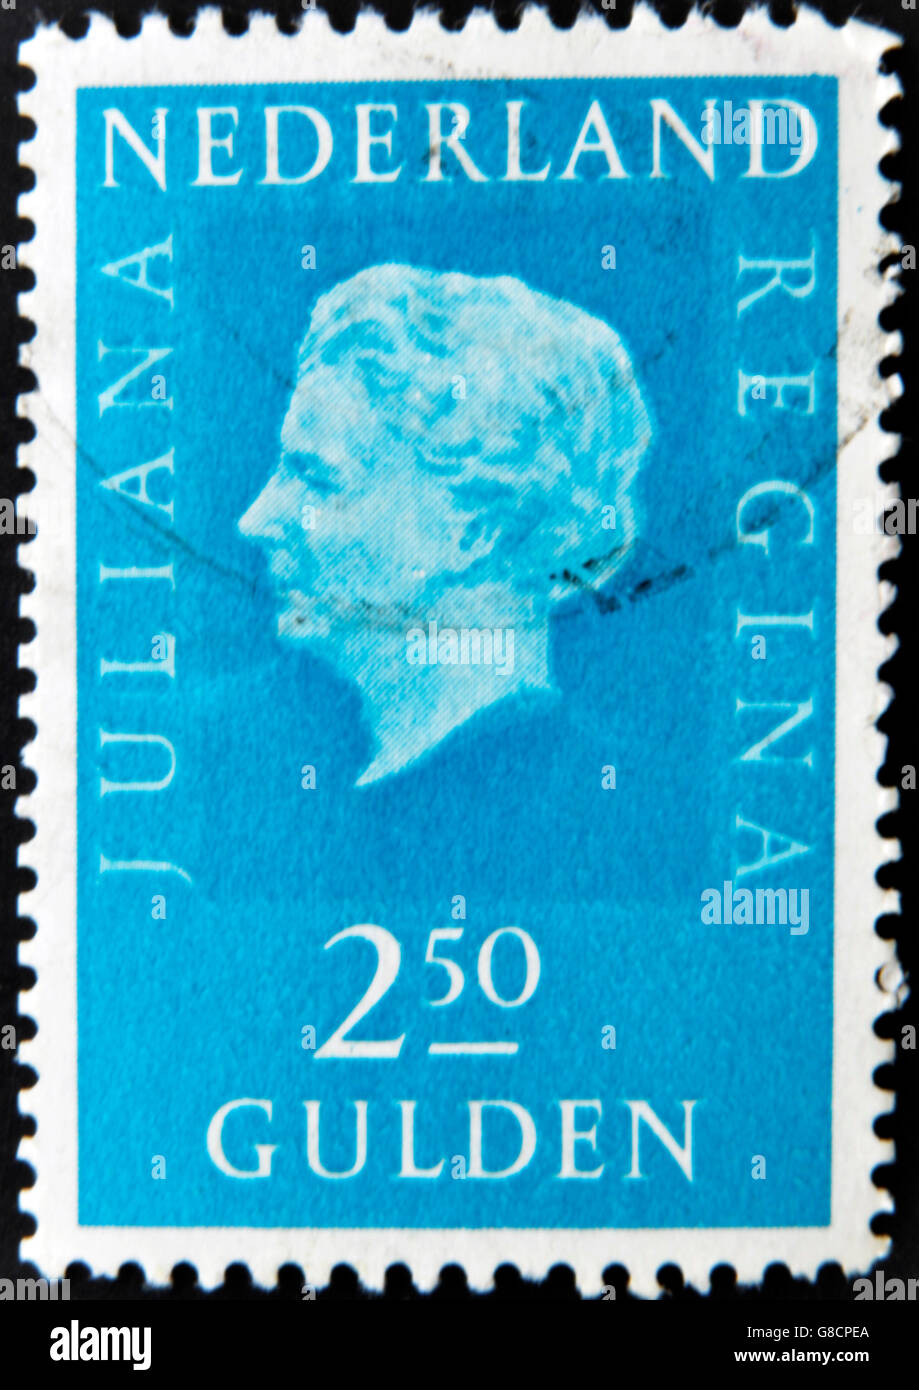 HOLLAND - CIRCA 1969: A stamp printed in the Netherlands showing a portrait of Queen Juliana, circa 1969. Stock Photo